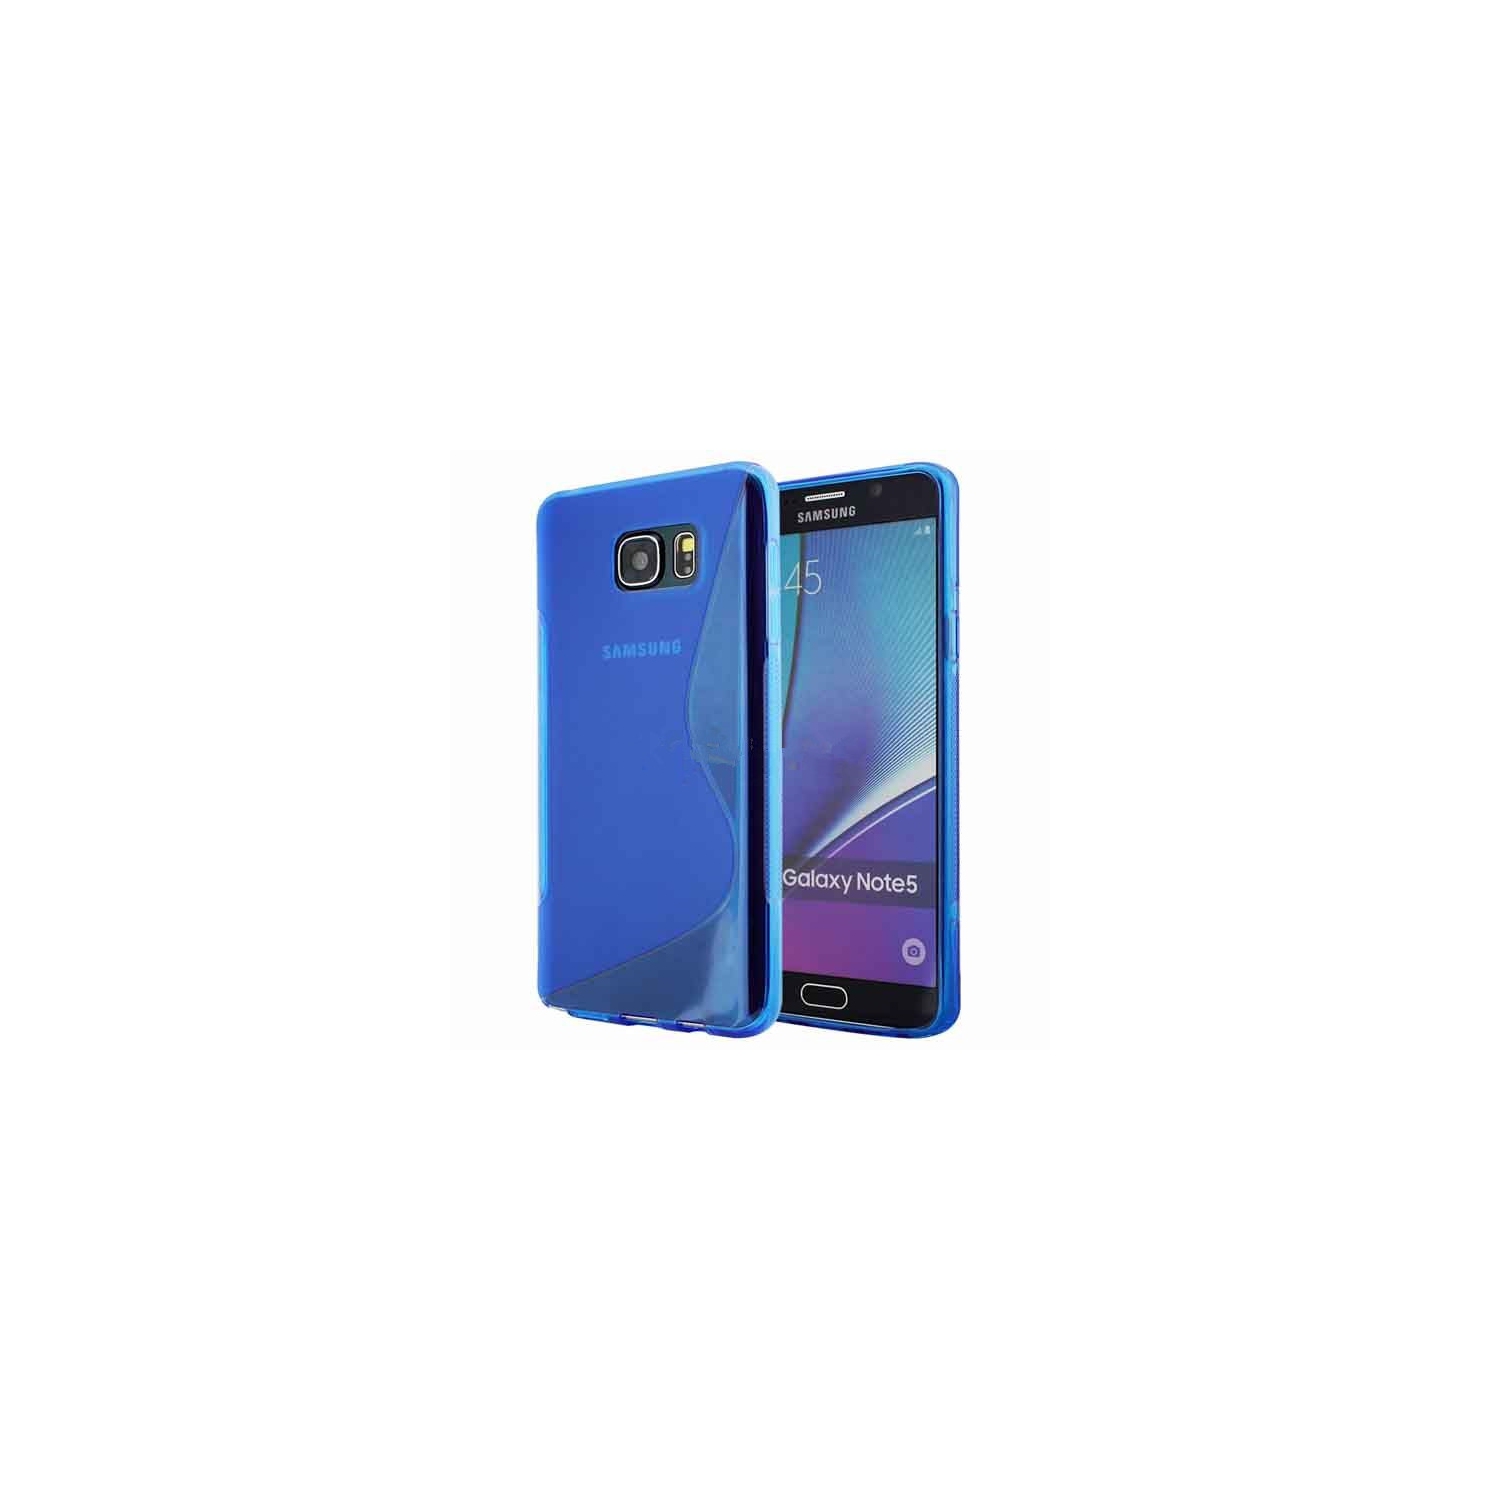 【CSmart】 Ultra Thin Soft TPU Silicone Jelly Bumper Back Cover Case for Samsung Note 5, Blue